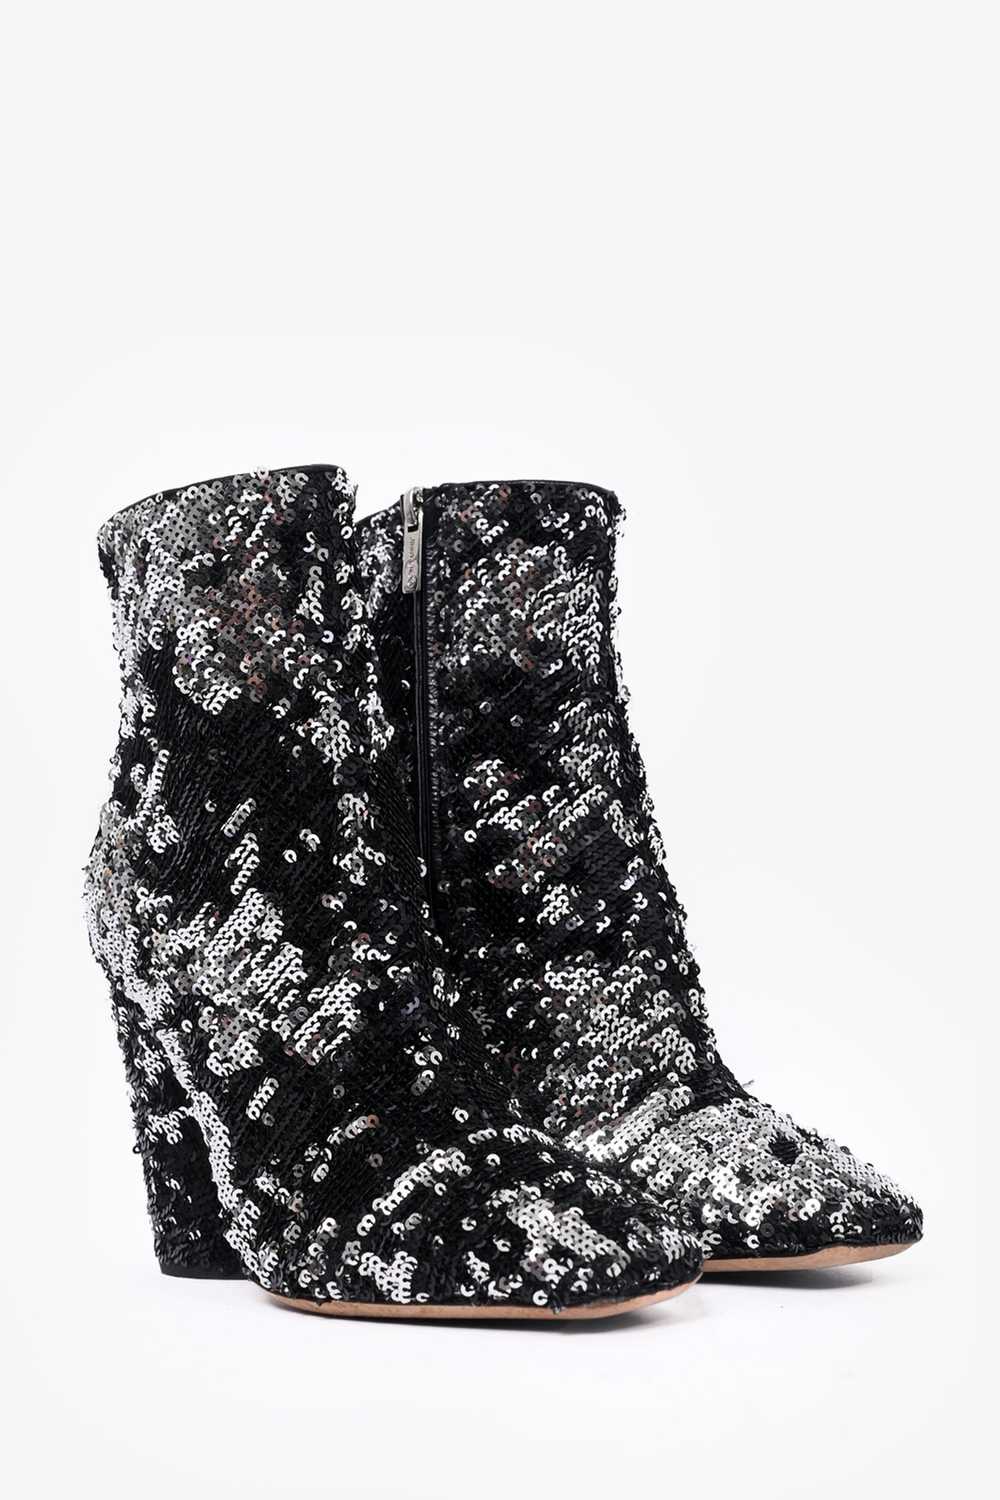 Jimmy Choo Black/Silver Sequin Heeled Boots Size … - image 2